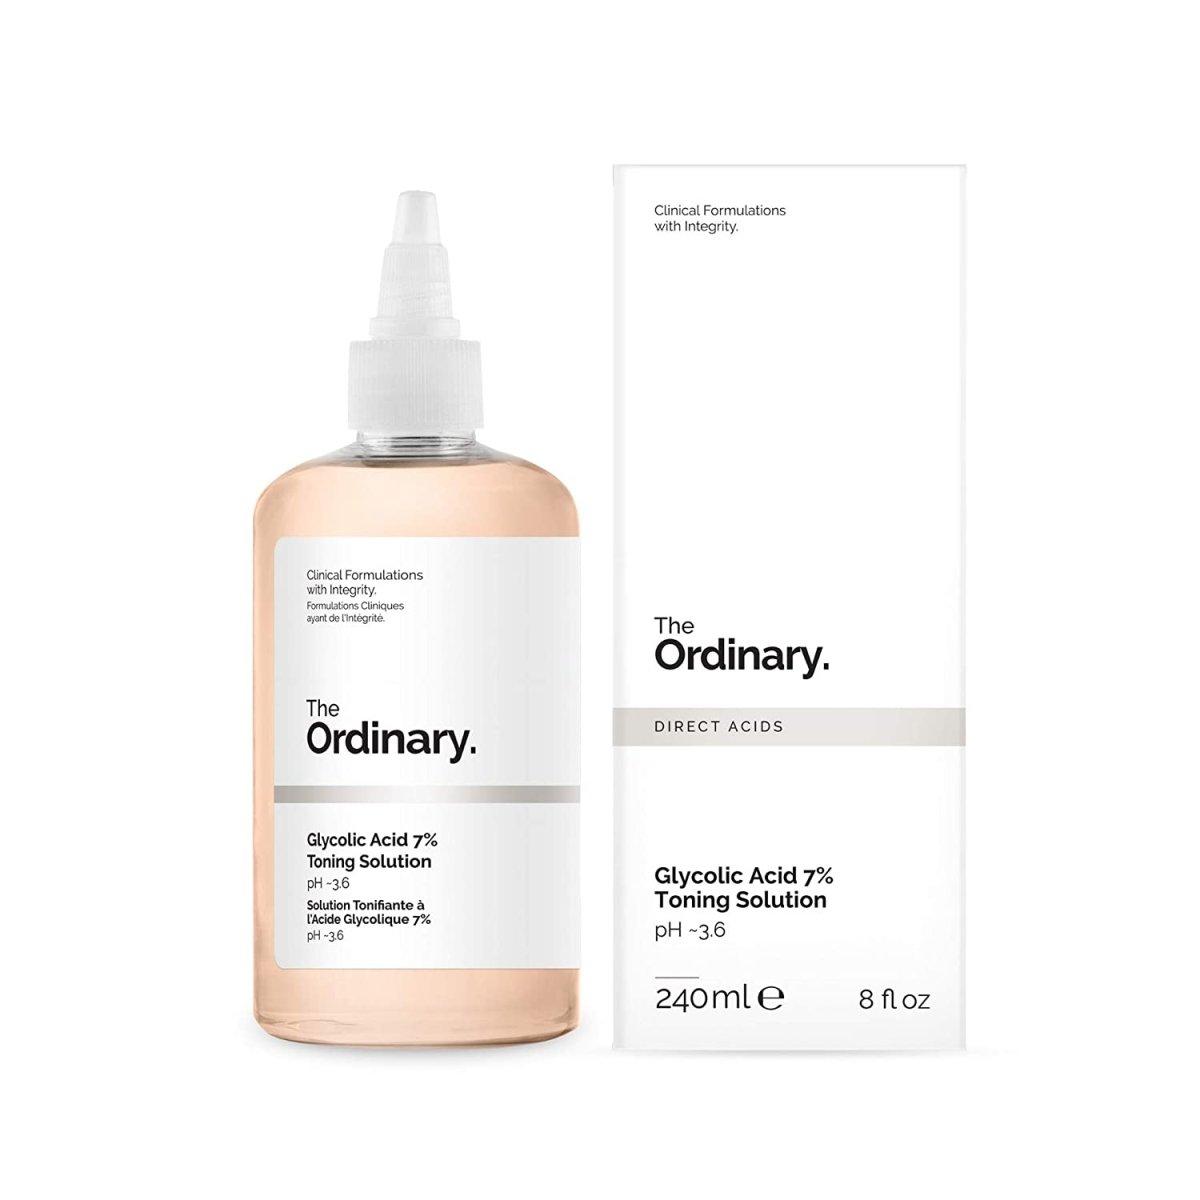 the ordinary Glycolic Acid 7% Toning Solution by eclat body lab